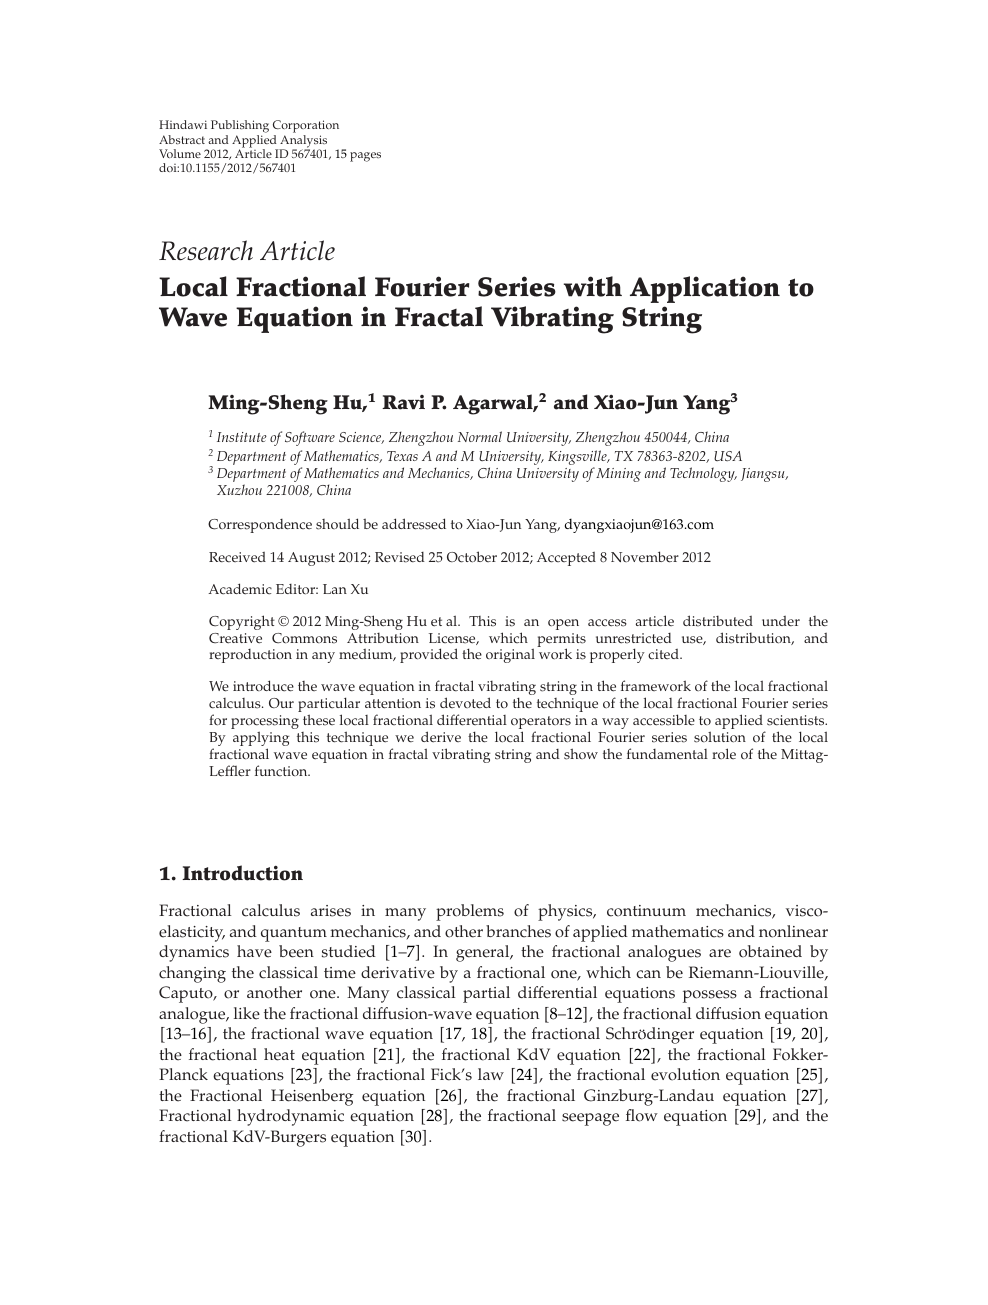 Local Fractional Fourier Series With Application To Wave Equation In Fractal Vibrating String Topic Of Research Paper In Mathematics Download Scholarly Article Pdf And Read For Free On Cyberleninka Open Science